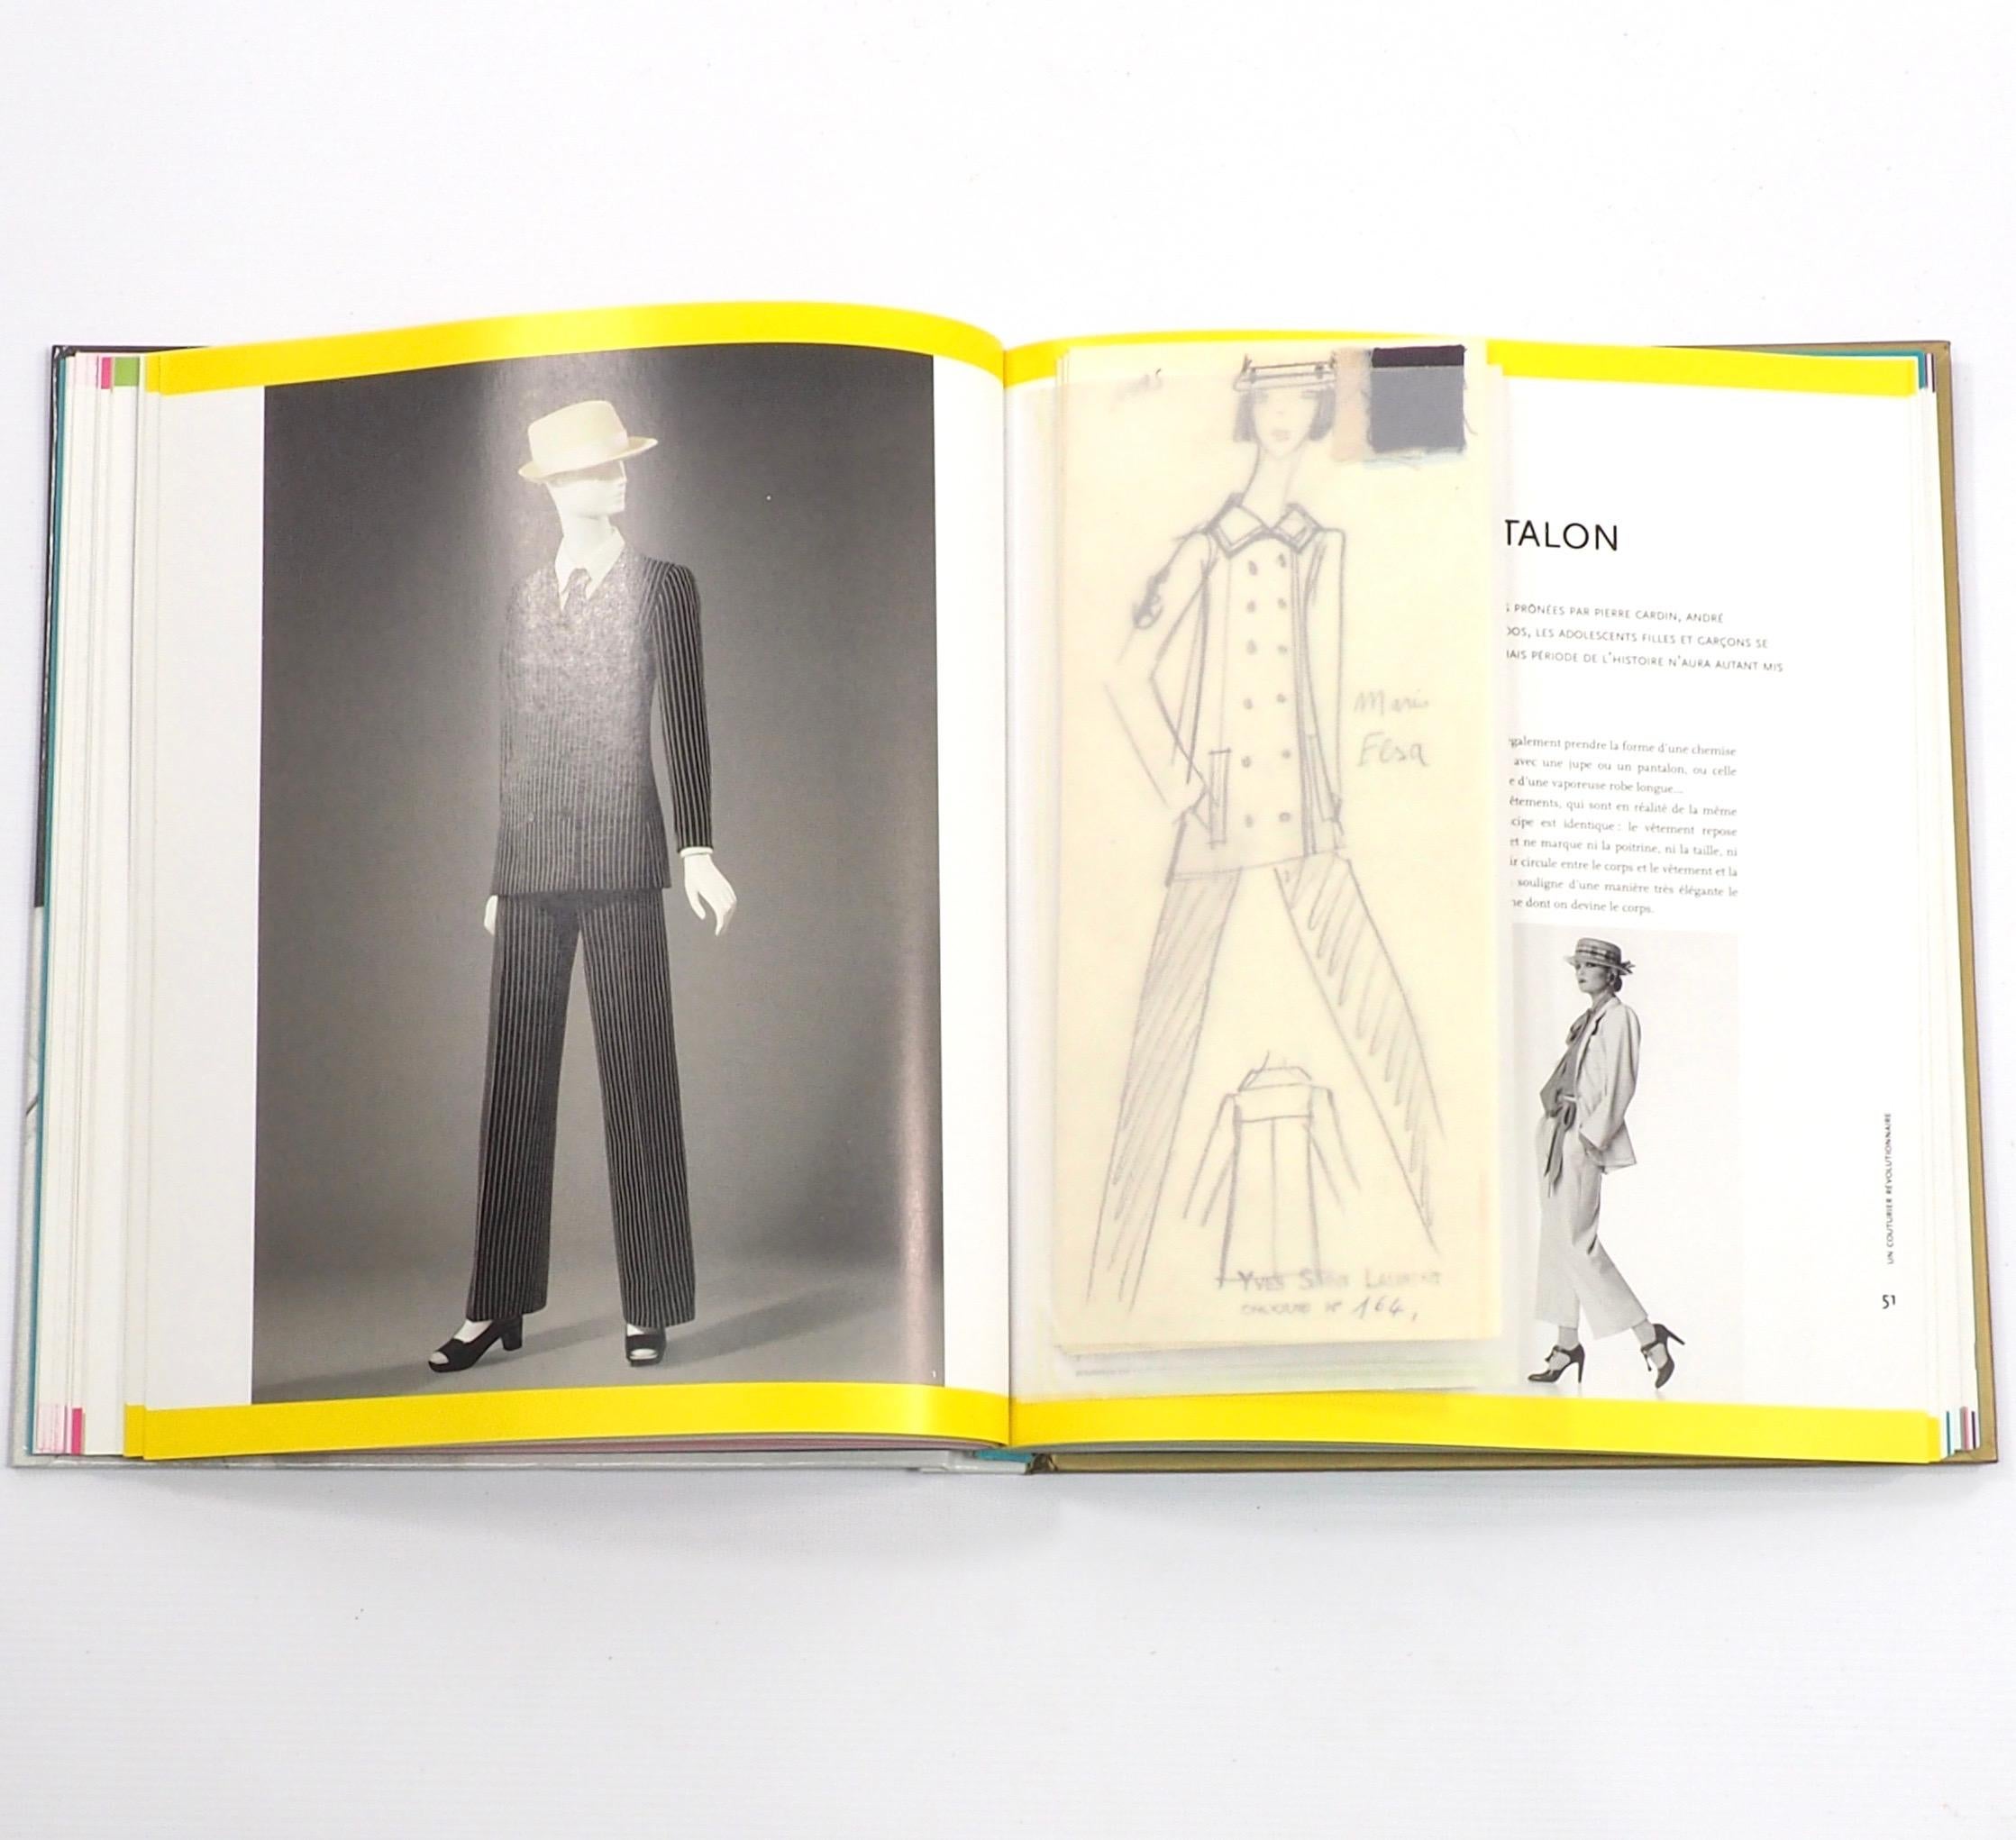 Yves Saint Lauren  - All About Yves. Larousse, Paris 2016. First edition.

Lushly produced with Illustrations from the start of his career onwards with expensively produced facsimile inserts of Doll cut-outs, sketches, letters, polaroid photographs,